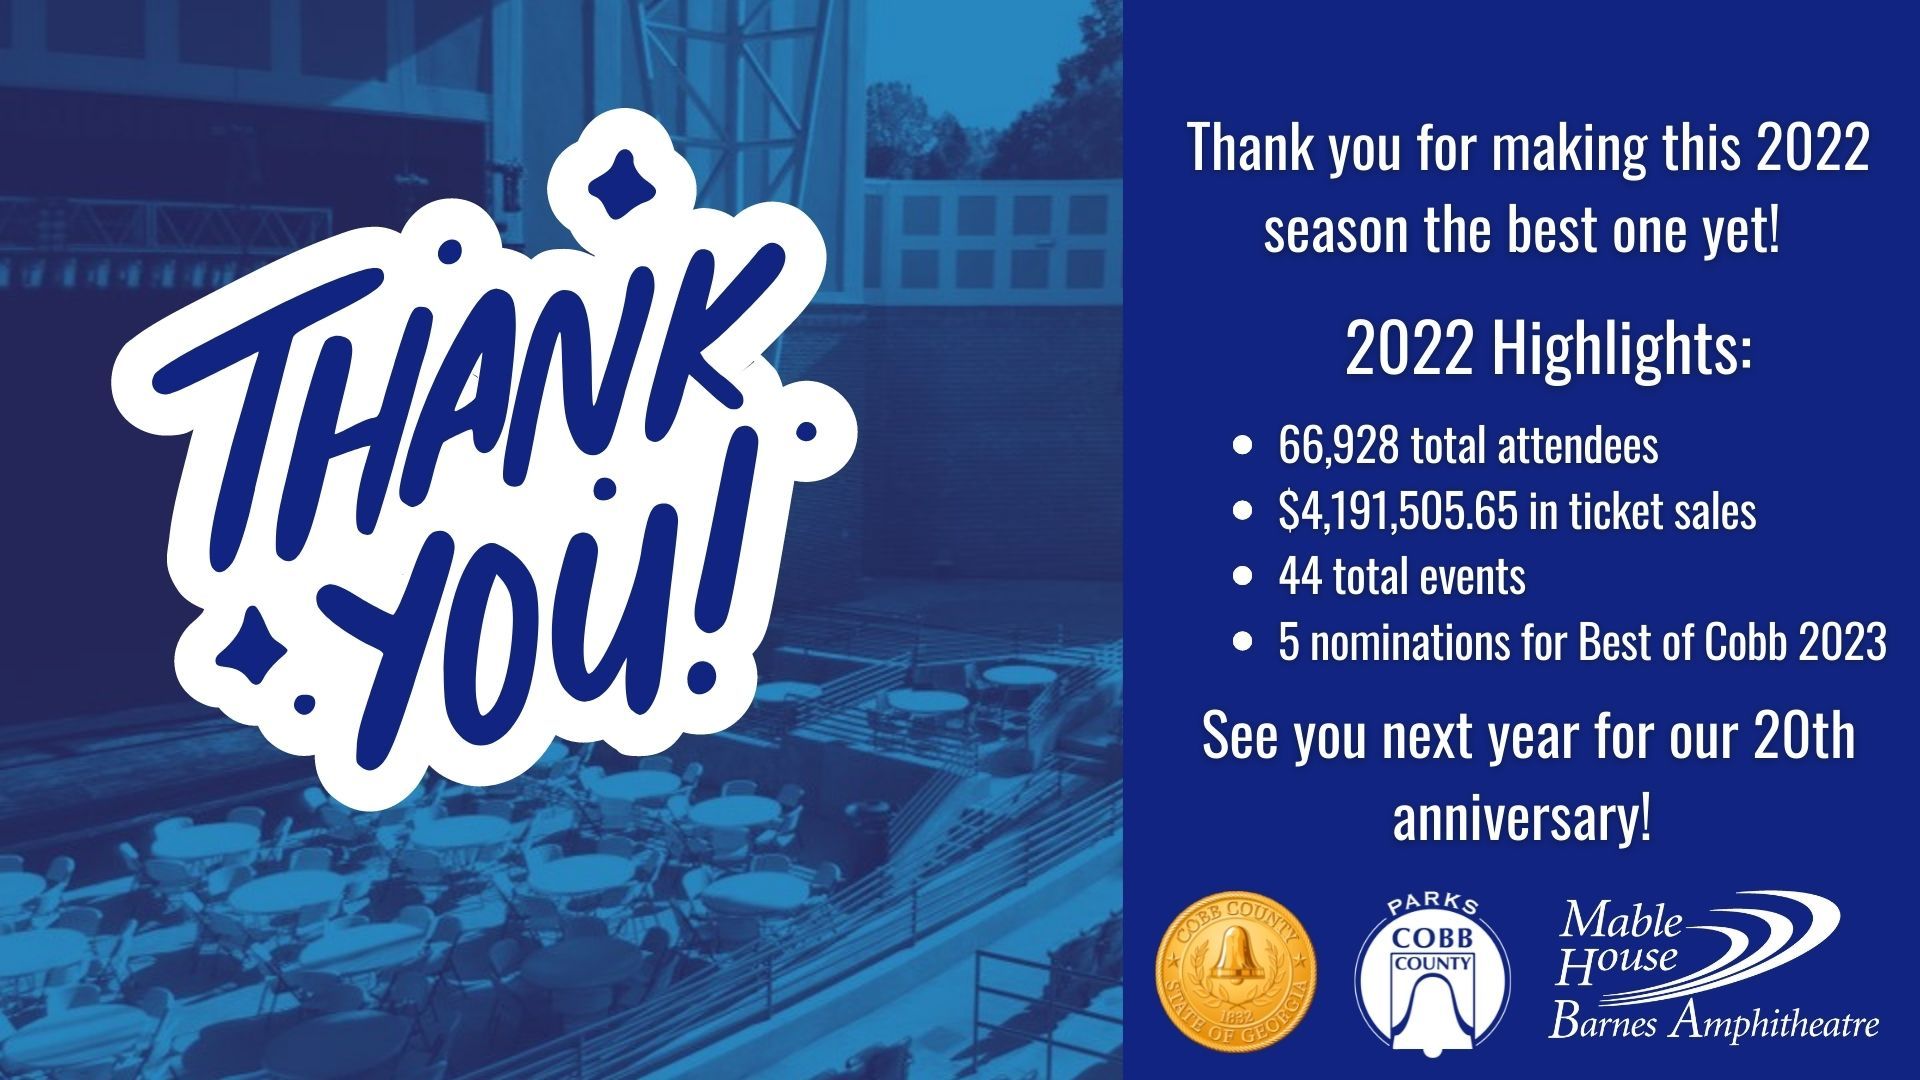 Thank you for making this 2022 season the best one yet!